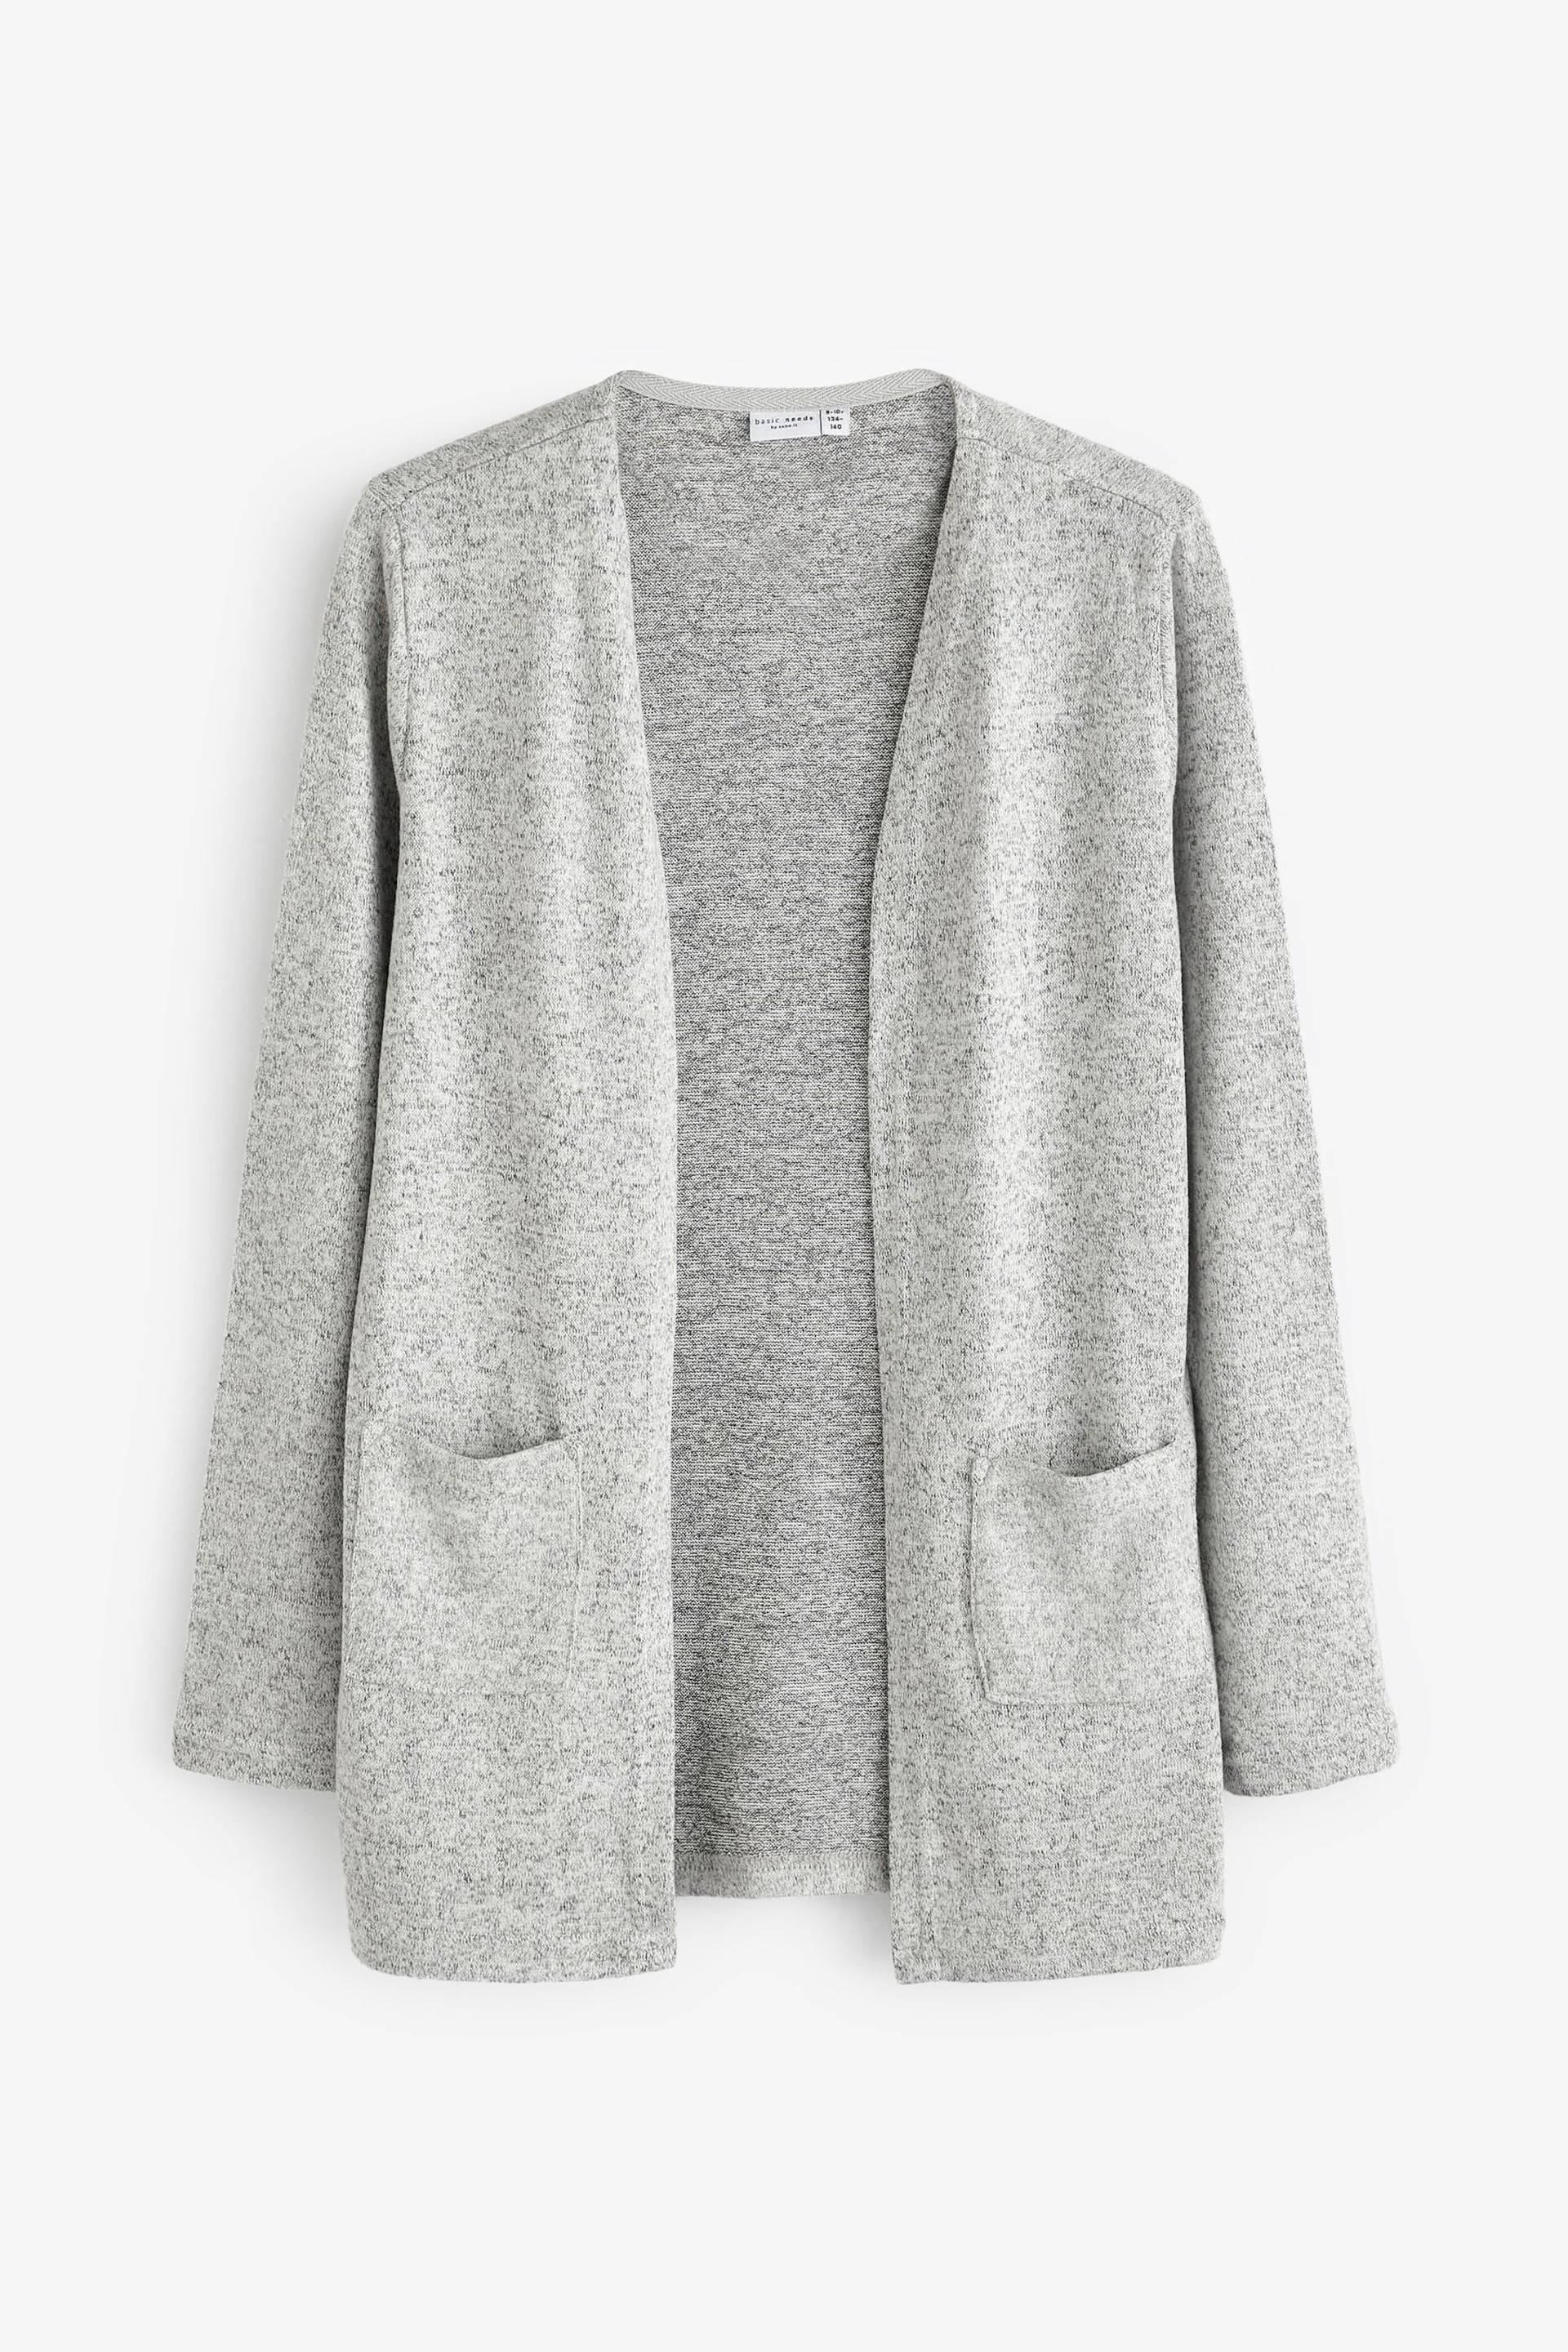 Name It Grey Knitted Cardigan with Pockets - Image 1 of 4